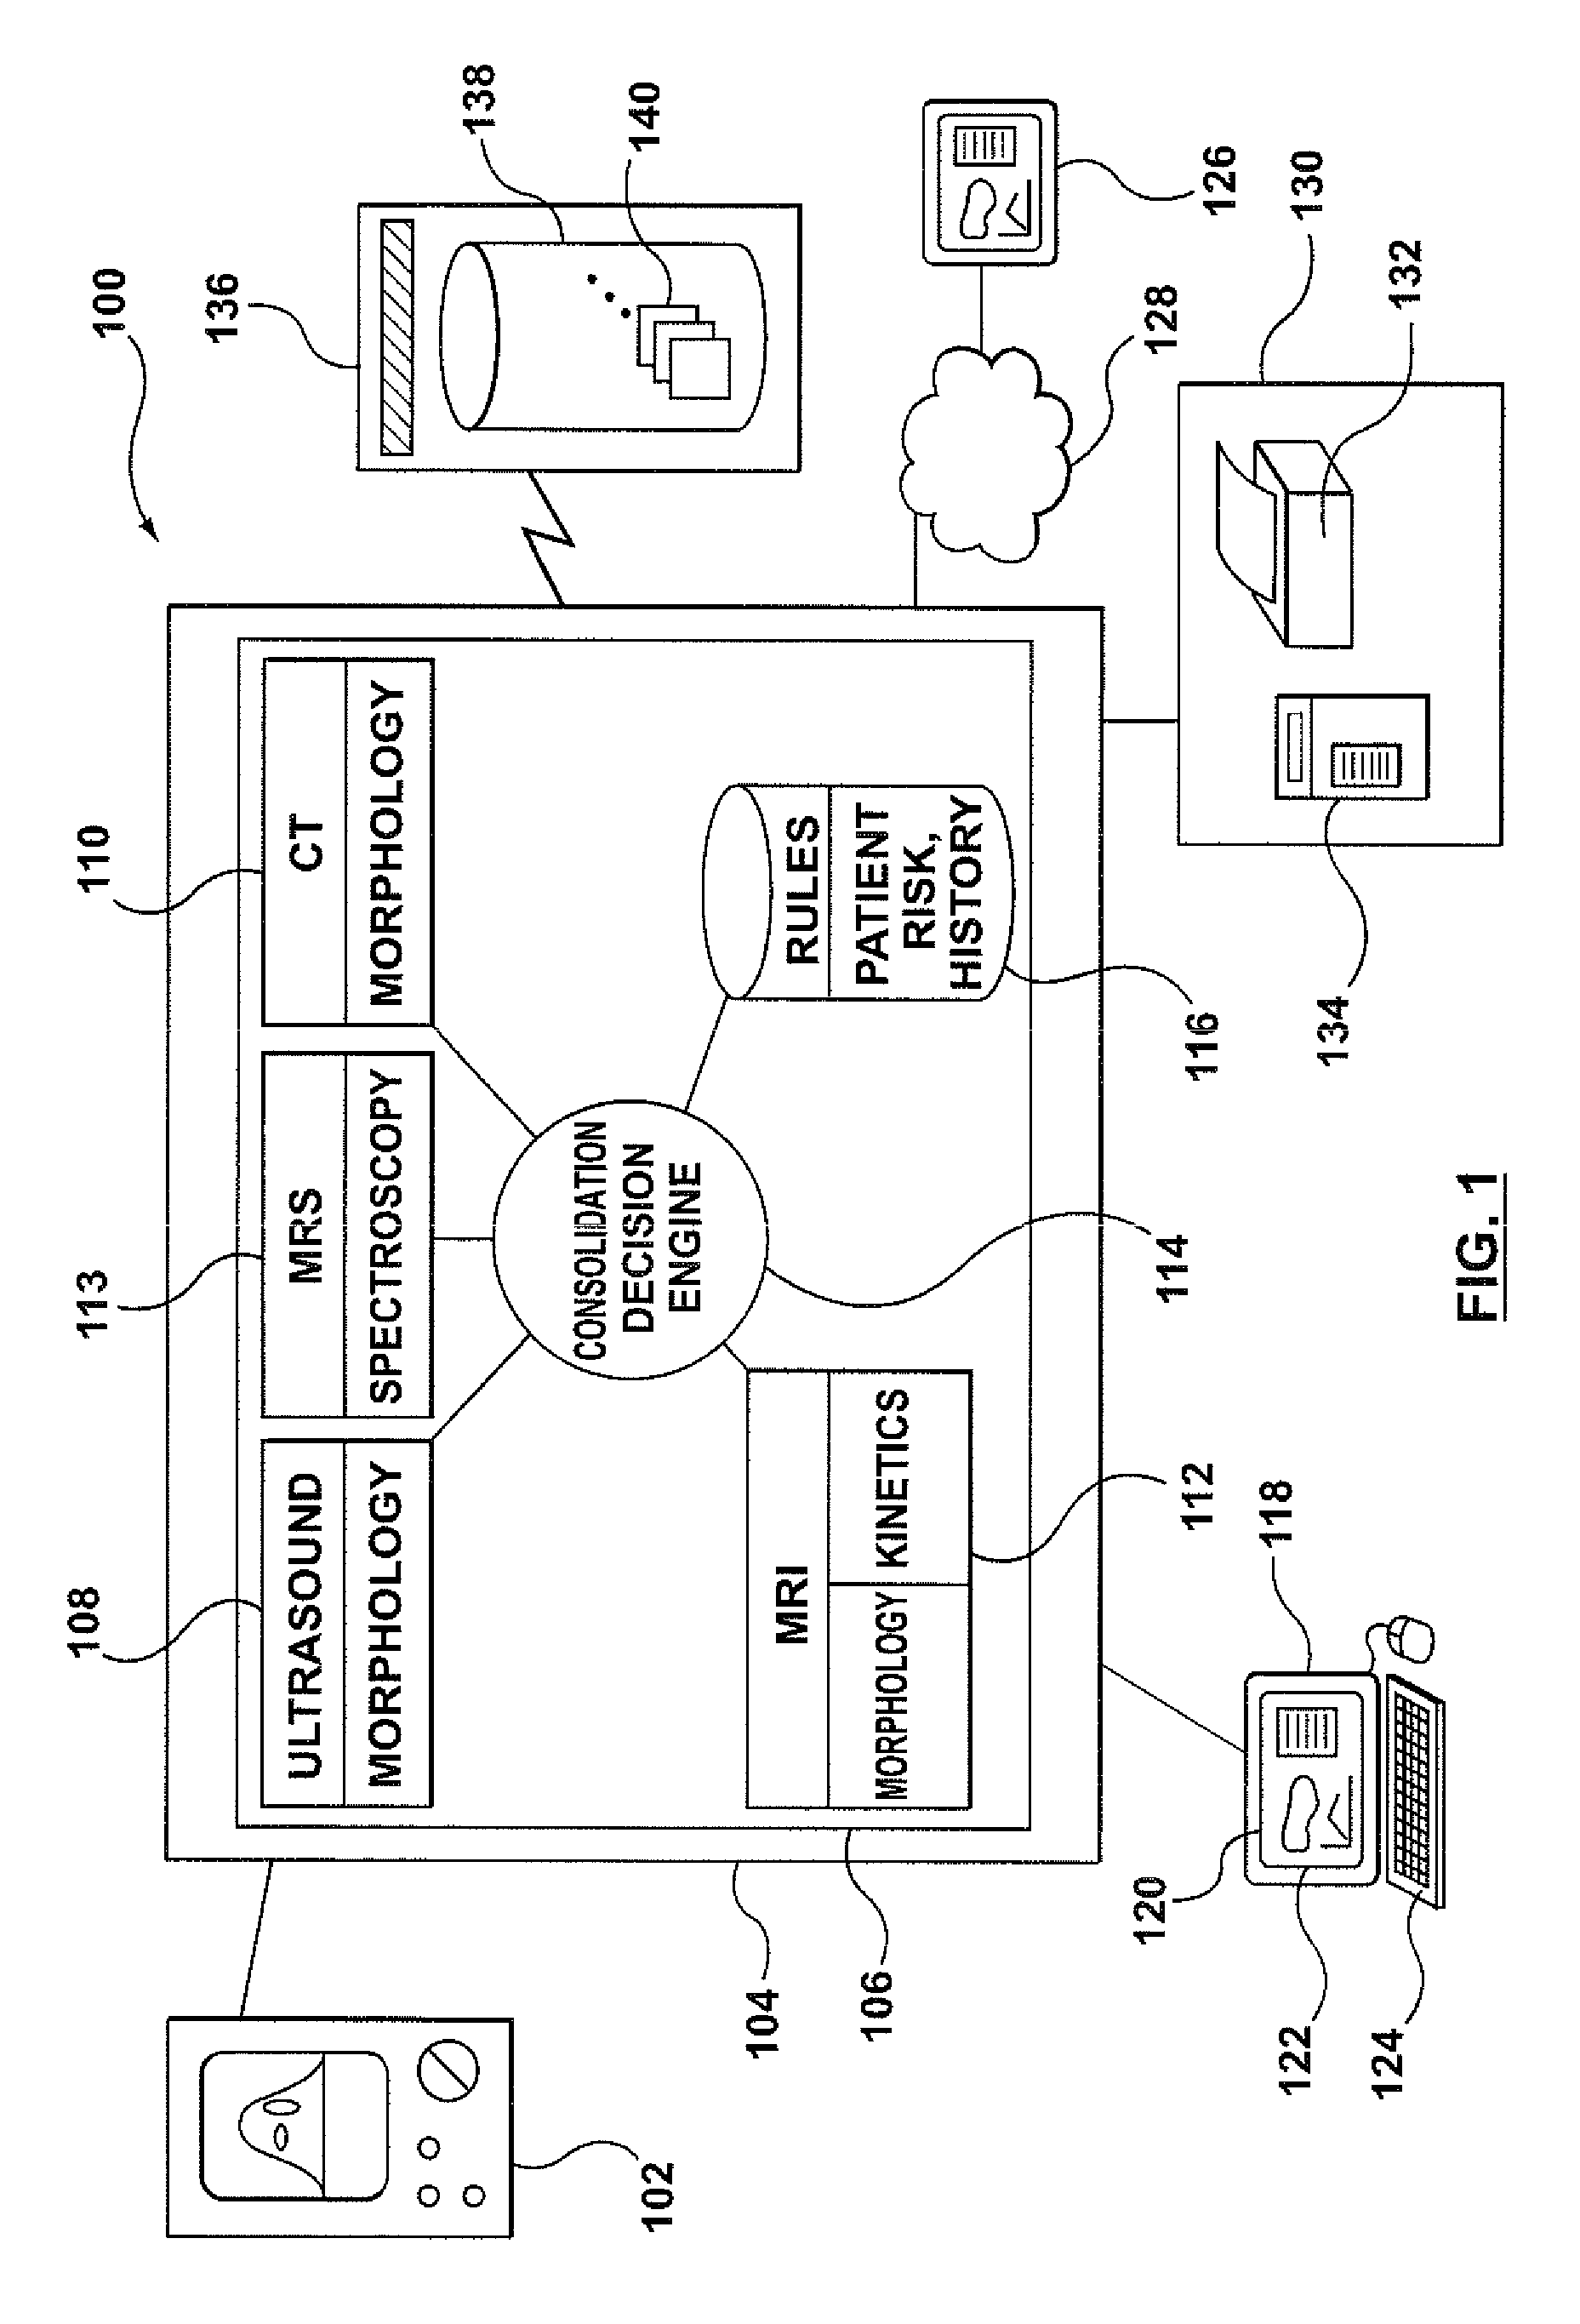 Method and system of computer-aided quantitative and qualitative analysis of medical images